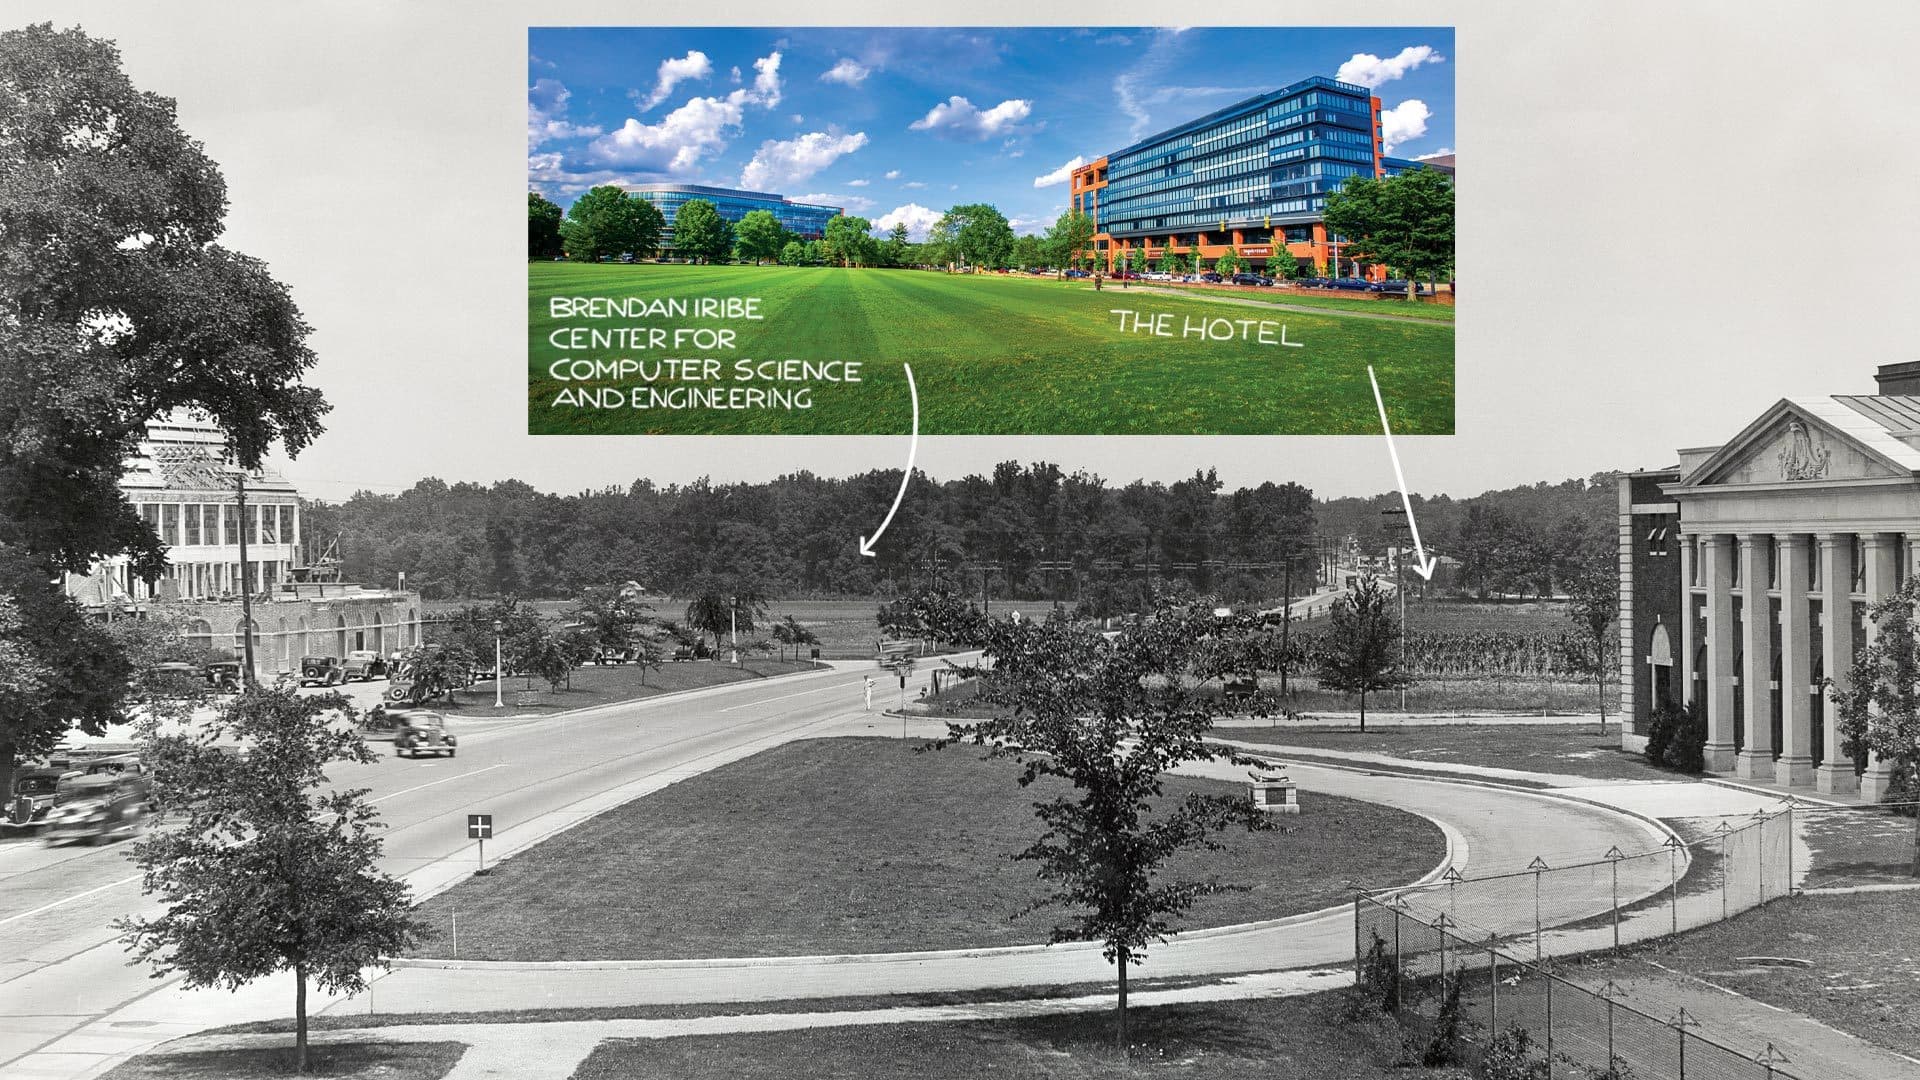 Iribe Center and The Hotel on archival photo of circle drive by Ritchie